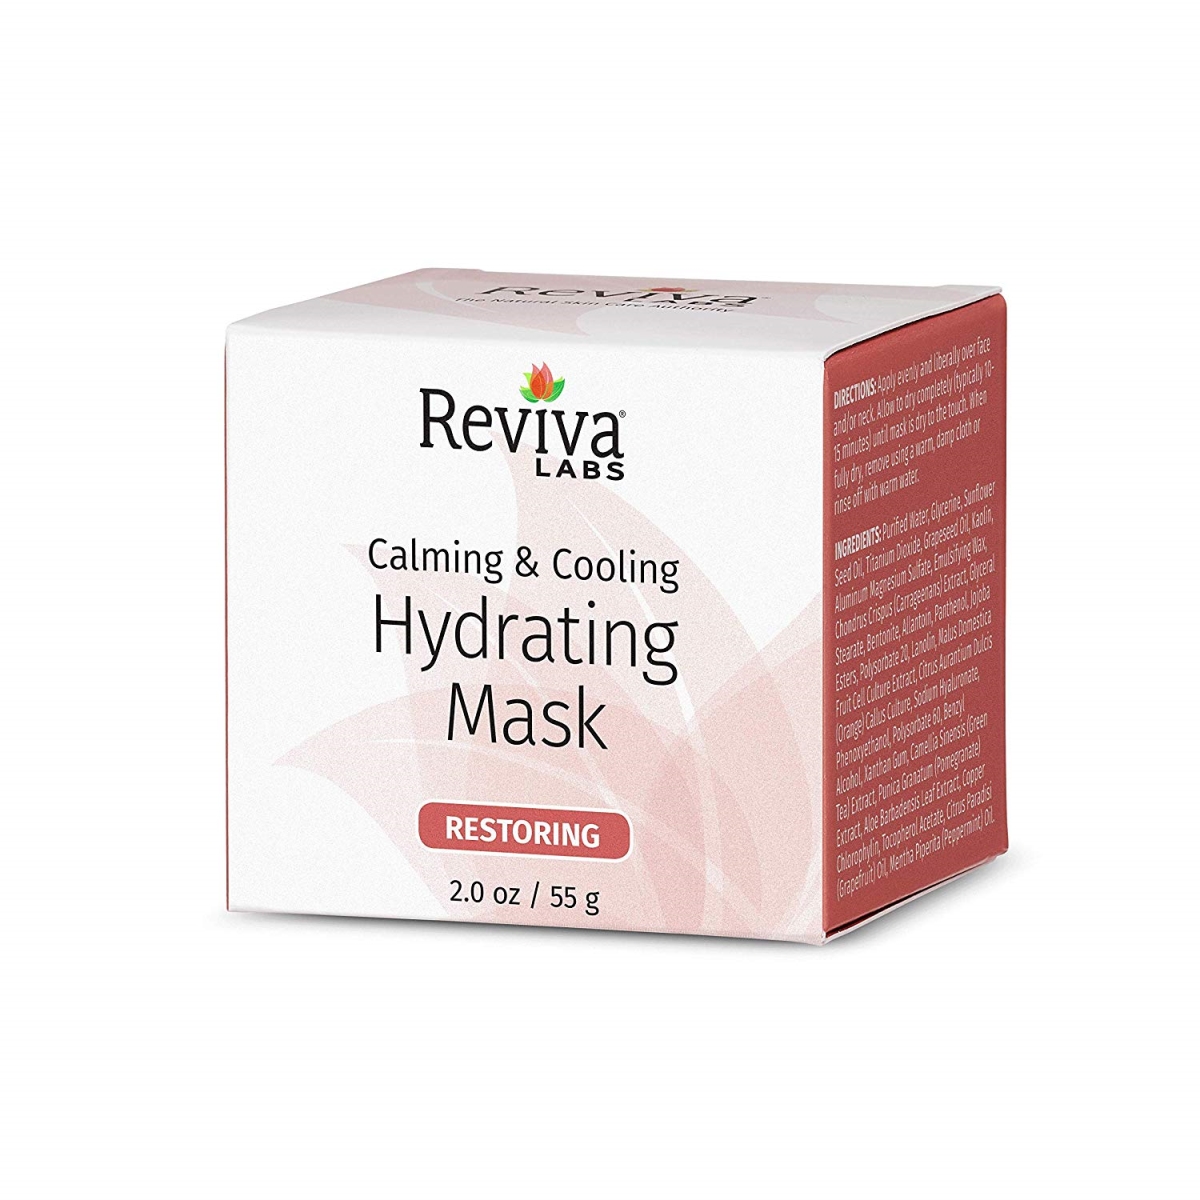 R076 2 Oz Calming & Cooling Hydrating Mask - Case Of 6